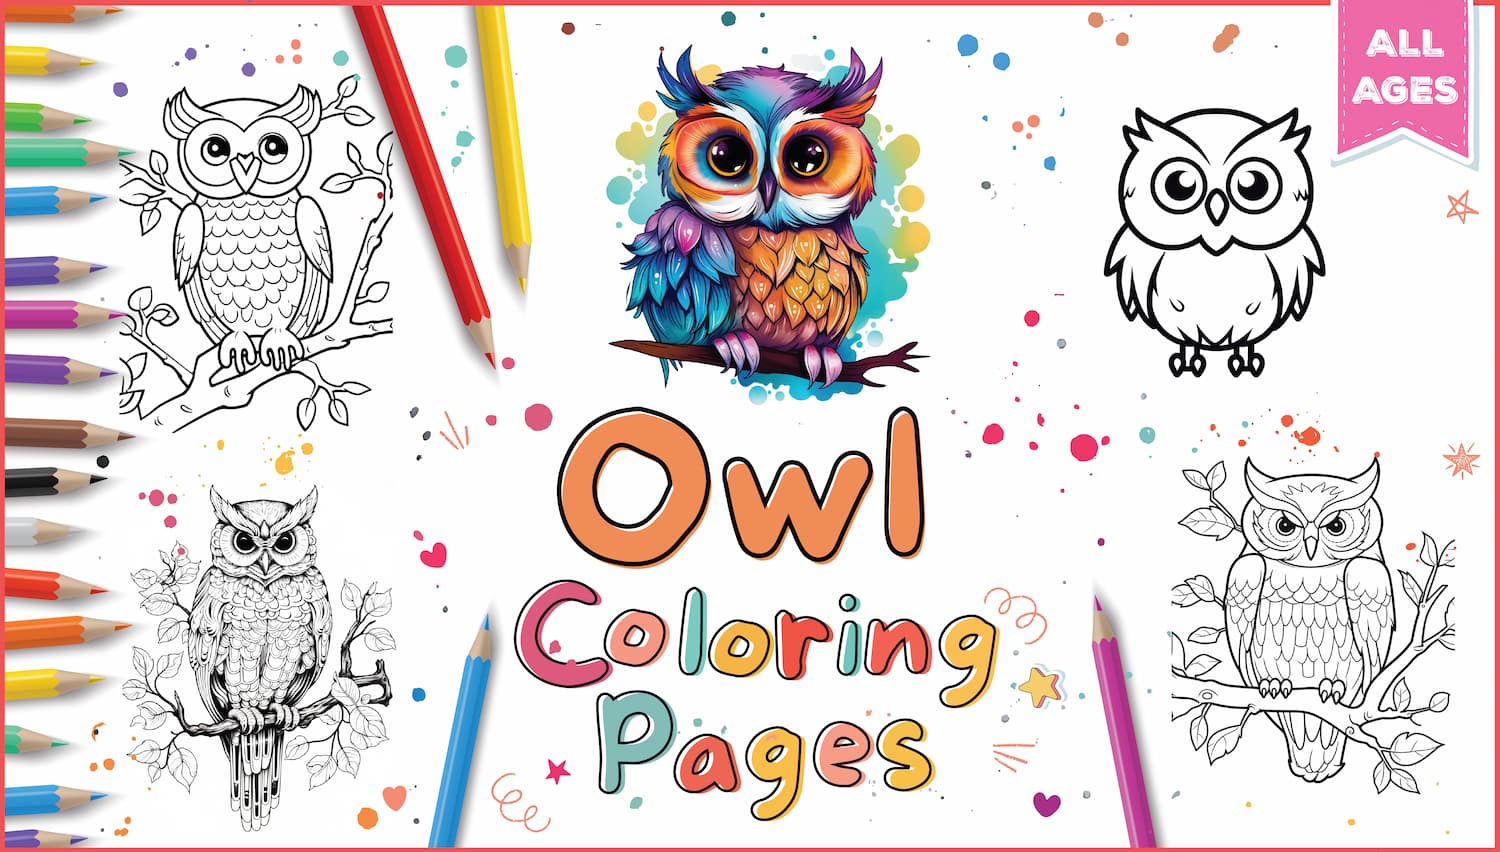 Owl coloring pages for kids adults